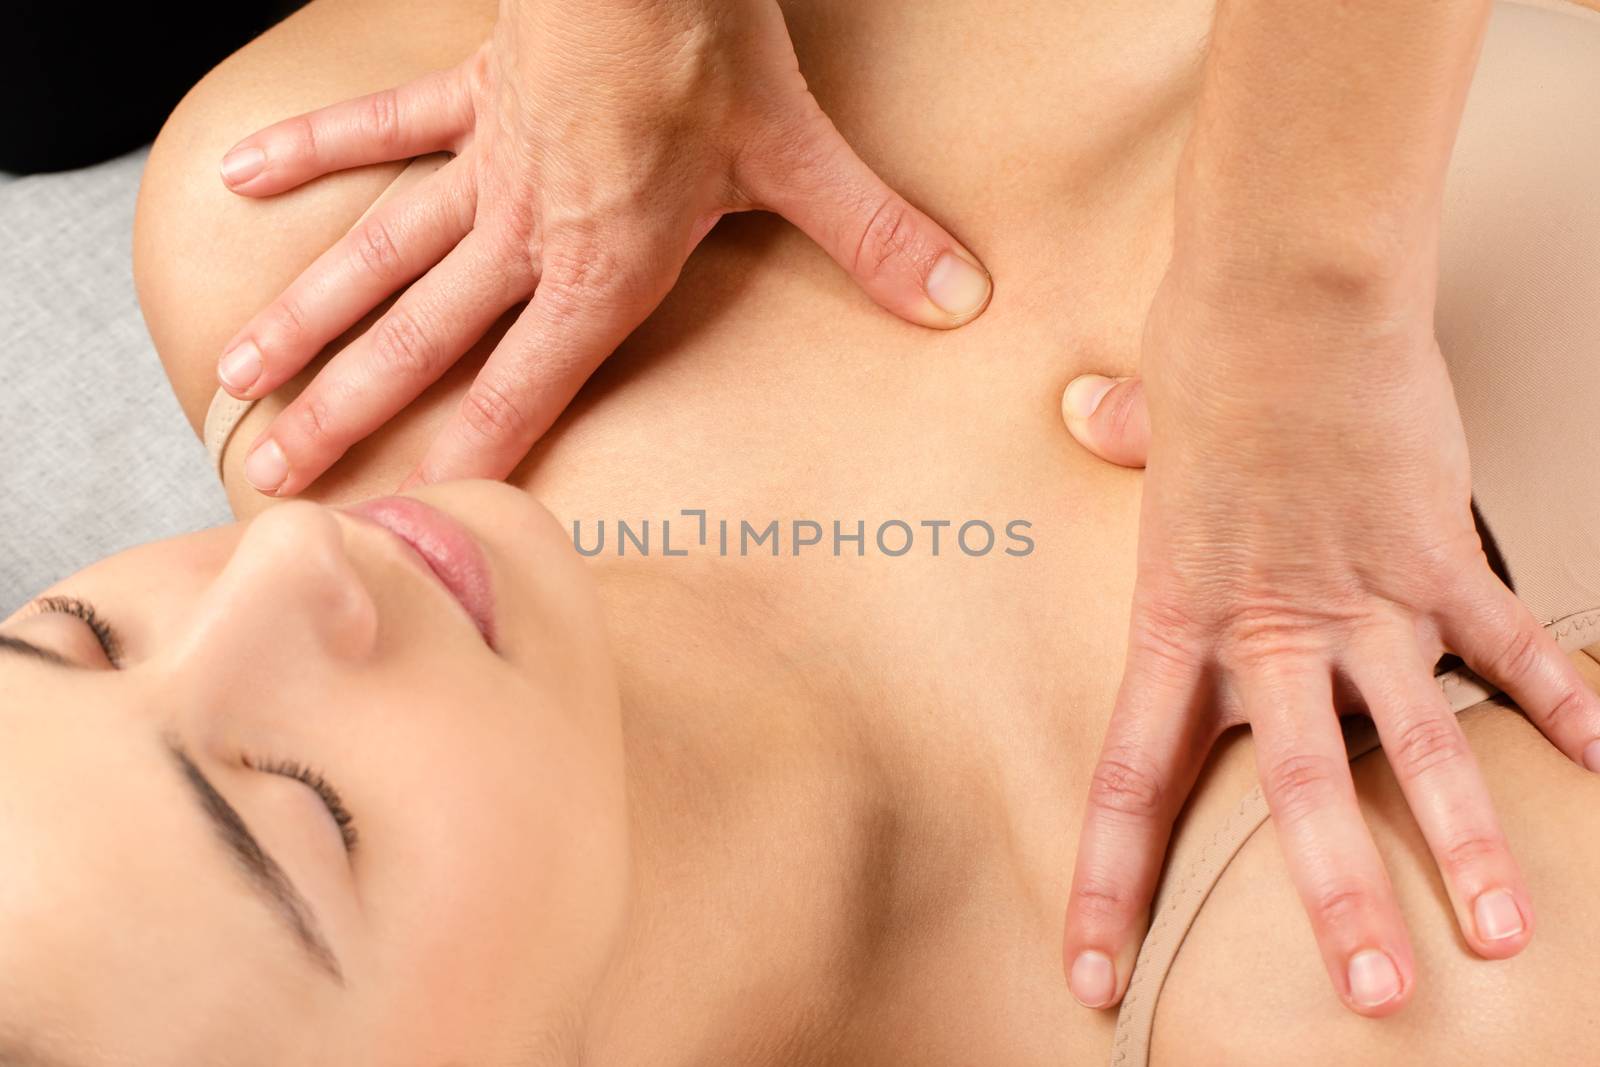 Hands massaging neuro emotional area on female chest. by karelnoppe